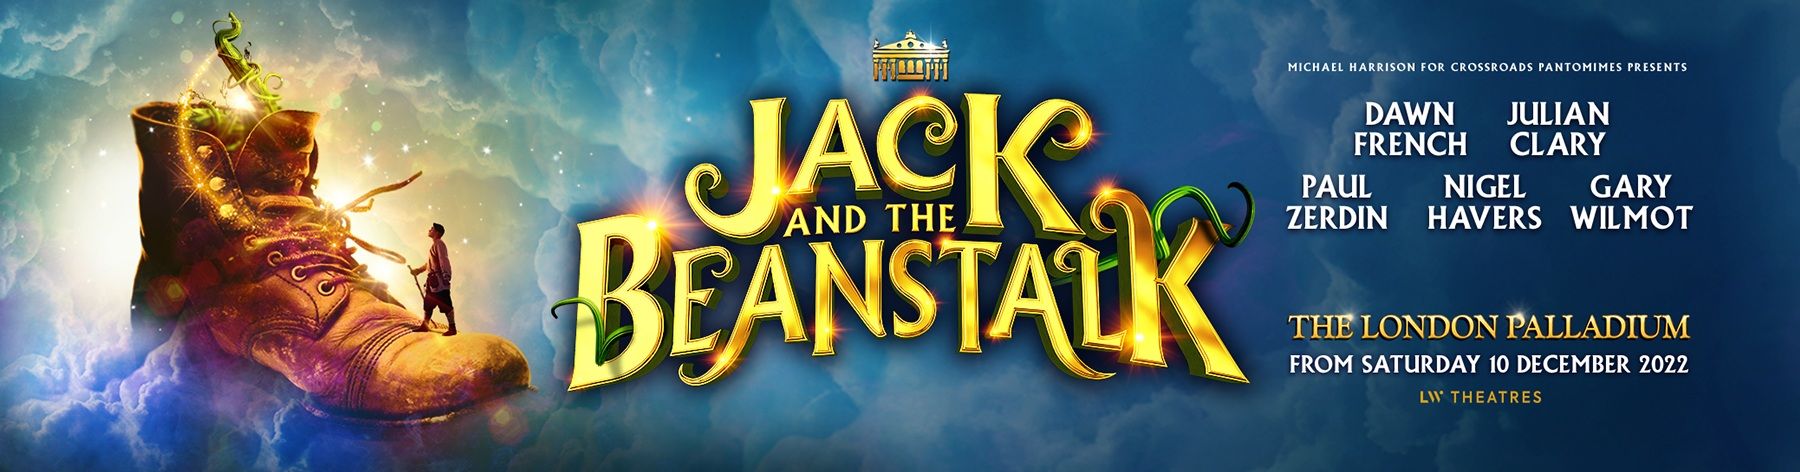 Join Julian Clary and Dawn French as they lead the cast for this new production. Buy Jack and the Beanstalk Palladium tickets. 